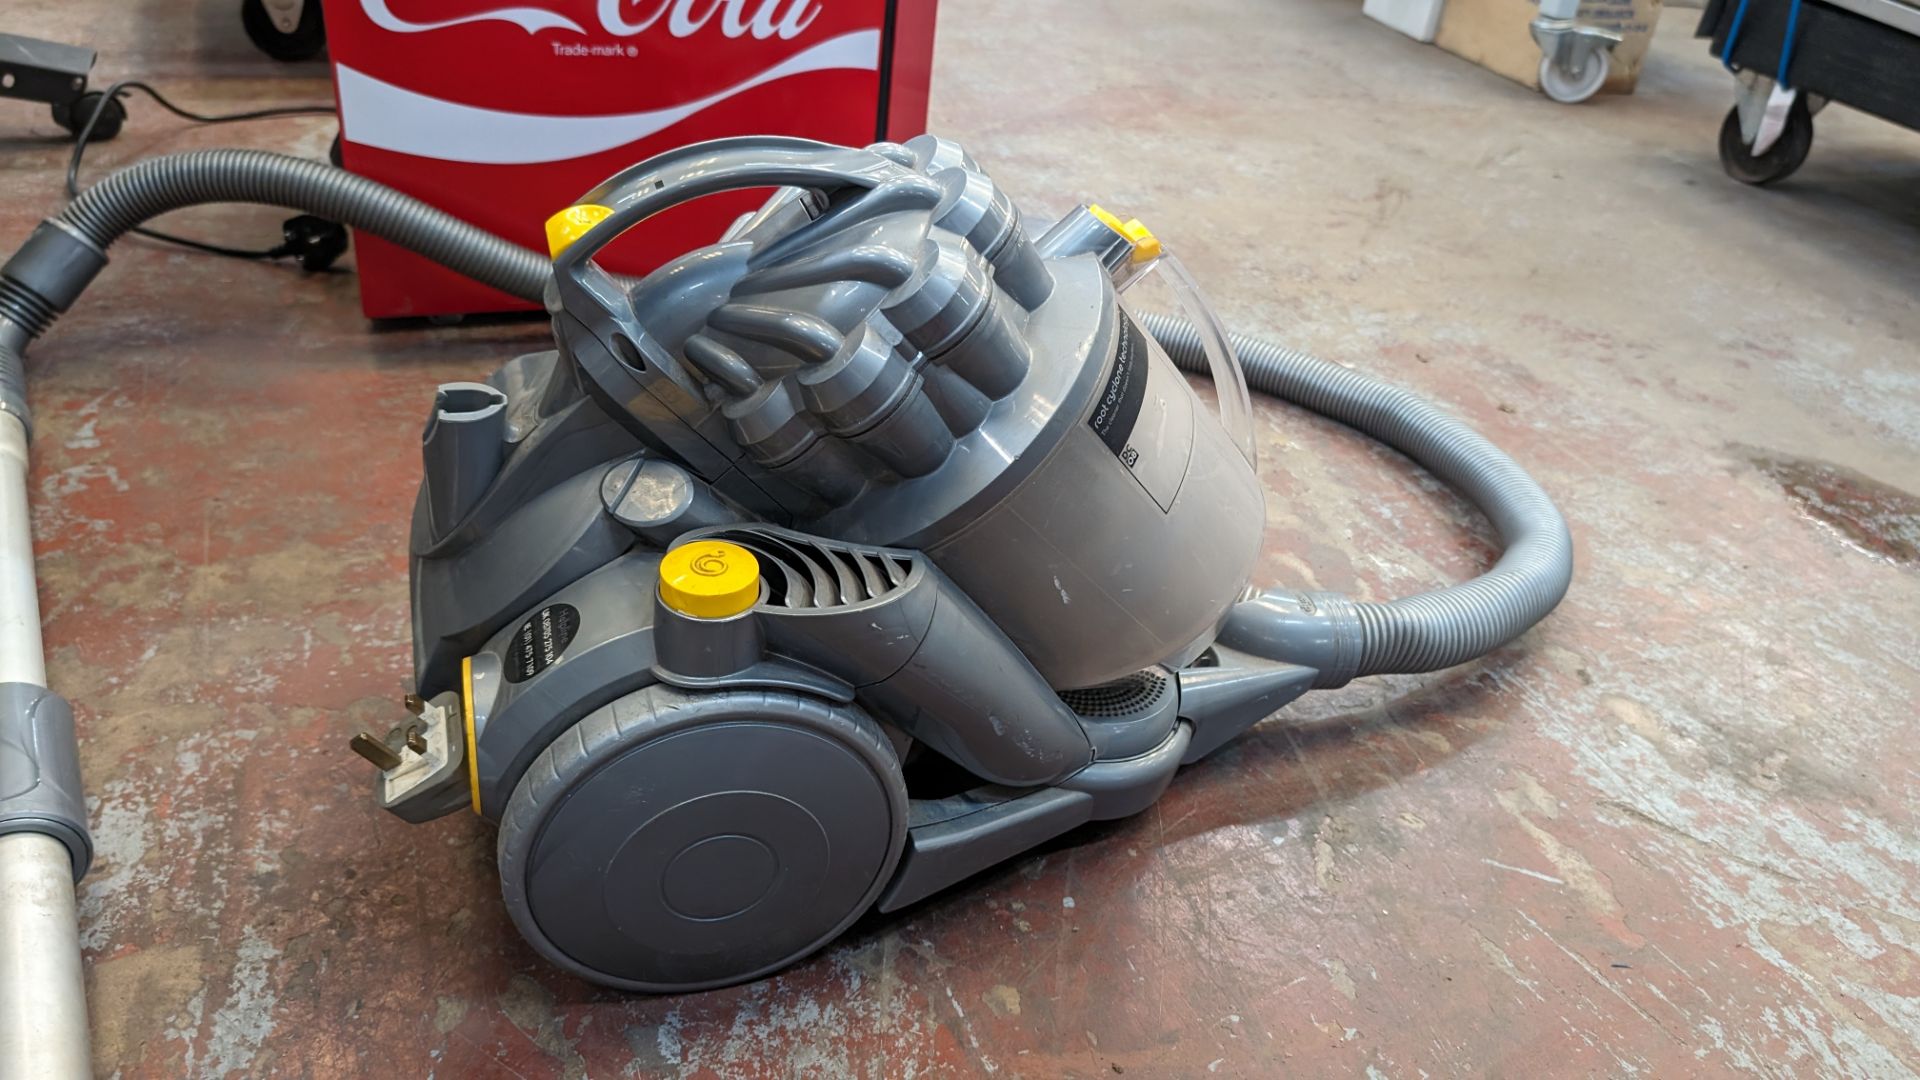 Dyson vacuum cleaner - Image 5 of 7